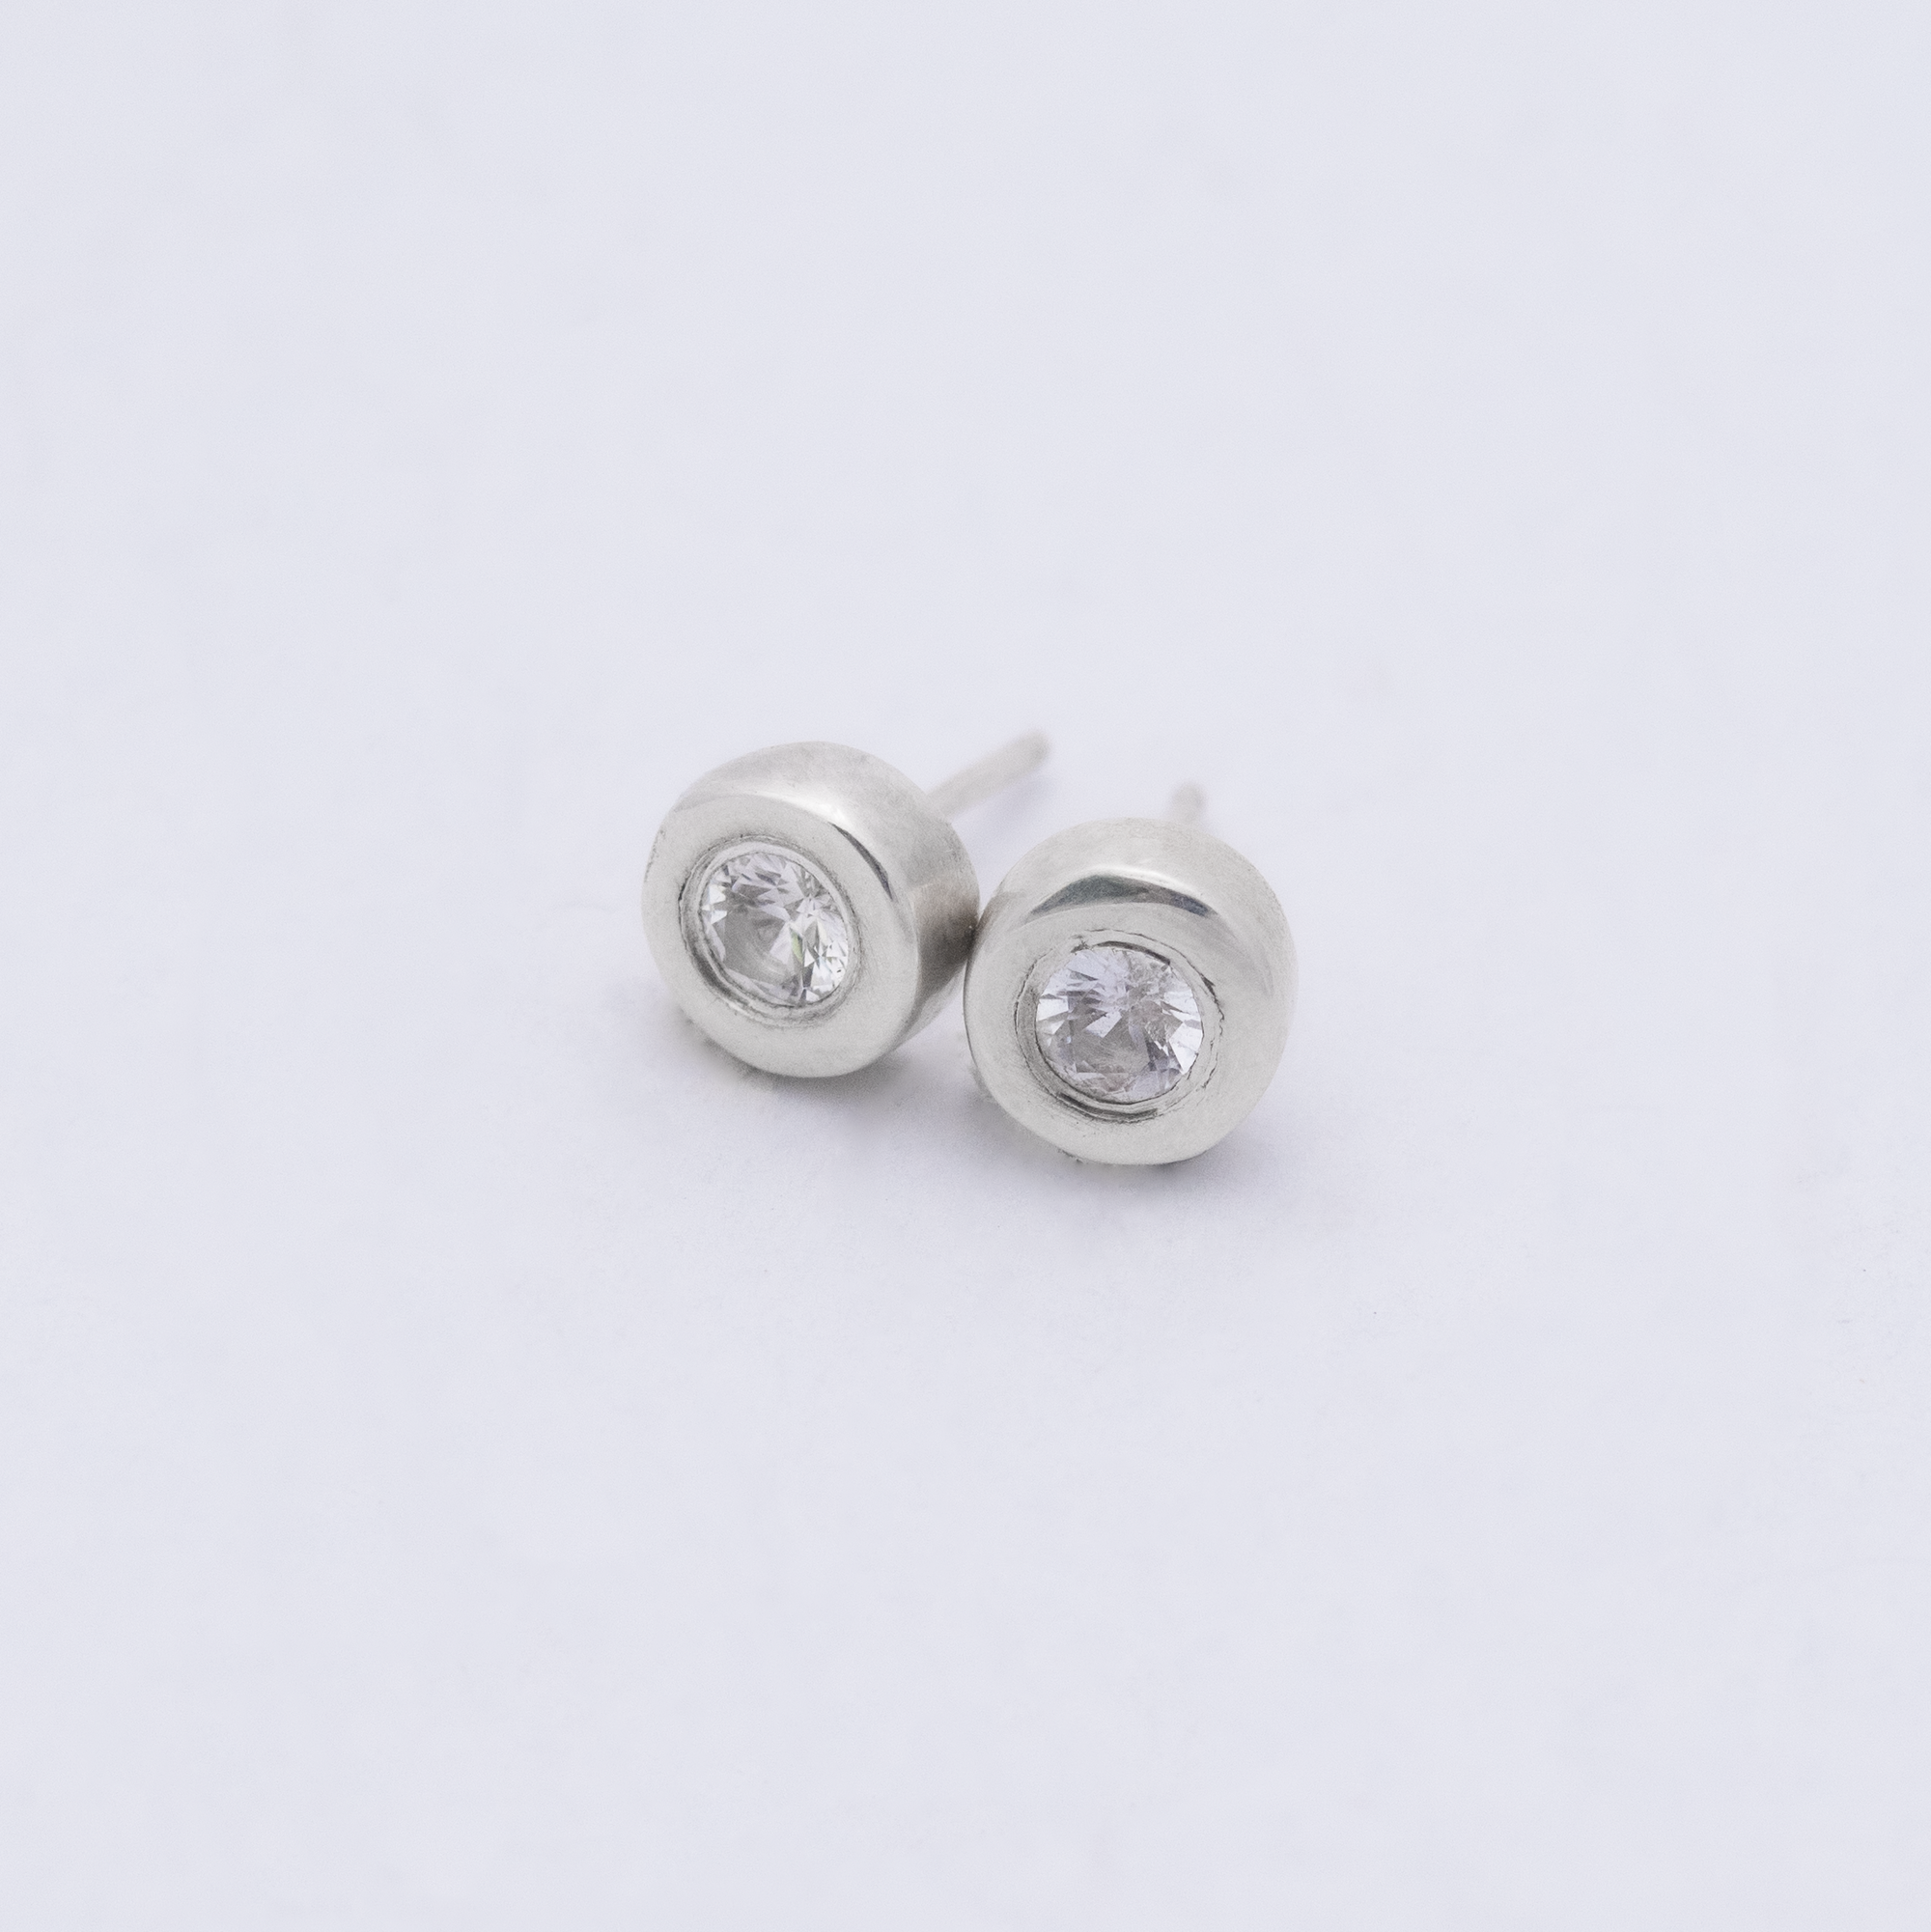 4mm white sapphire studs set in a chunky sterling silver, organically shaped setting. the perfect studs!